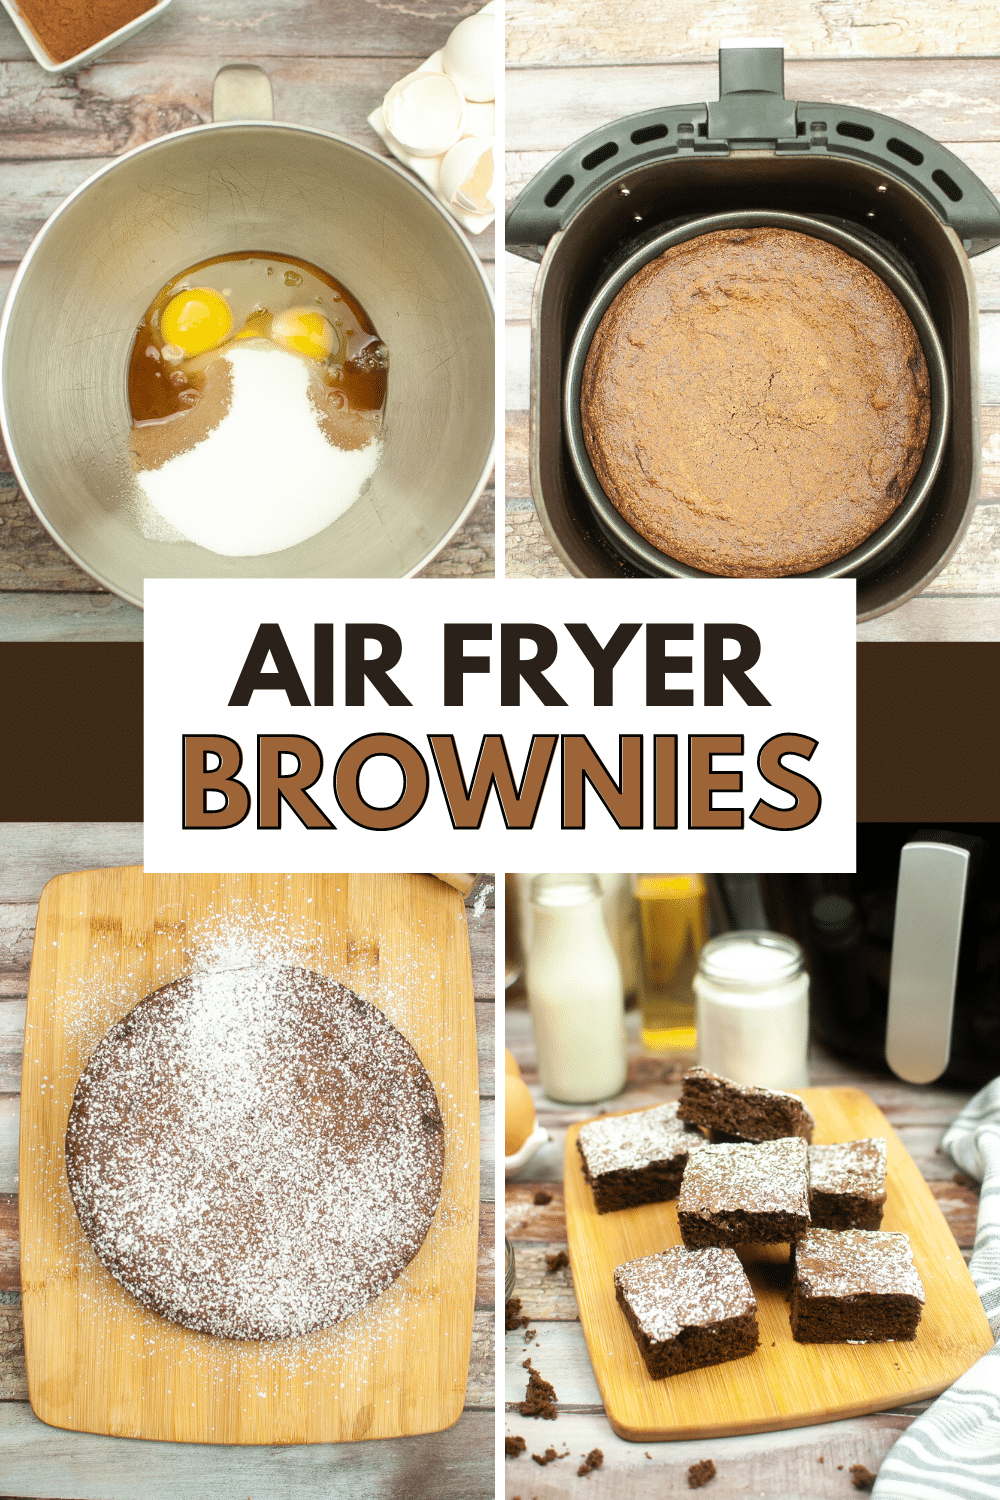 These Air Fryer Brownies are rich, fudgy, and perfectly crisp on the outside. They are made quickly with just a handful of ingredients. #airfryerbrownies #brownierecipe #airfryerdessertrecipes #fudgybrownies #airfryerrecipe via @wondermomwannab